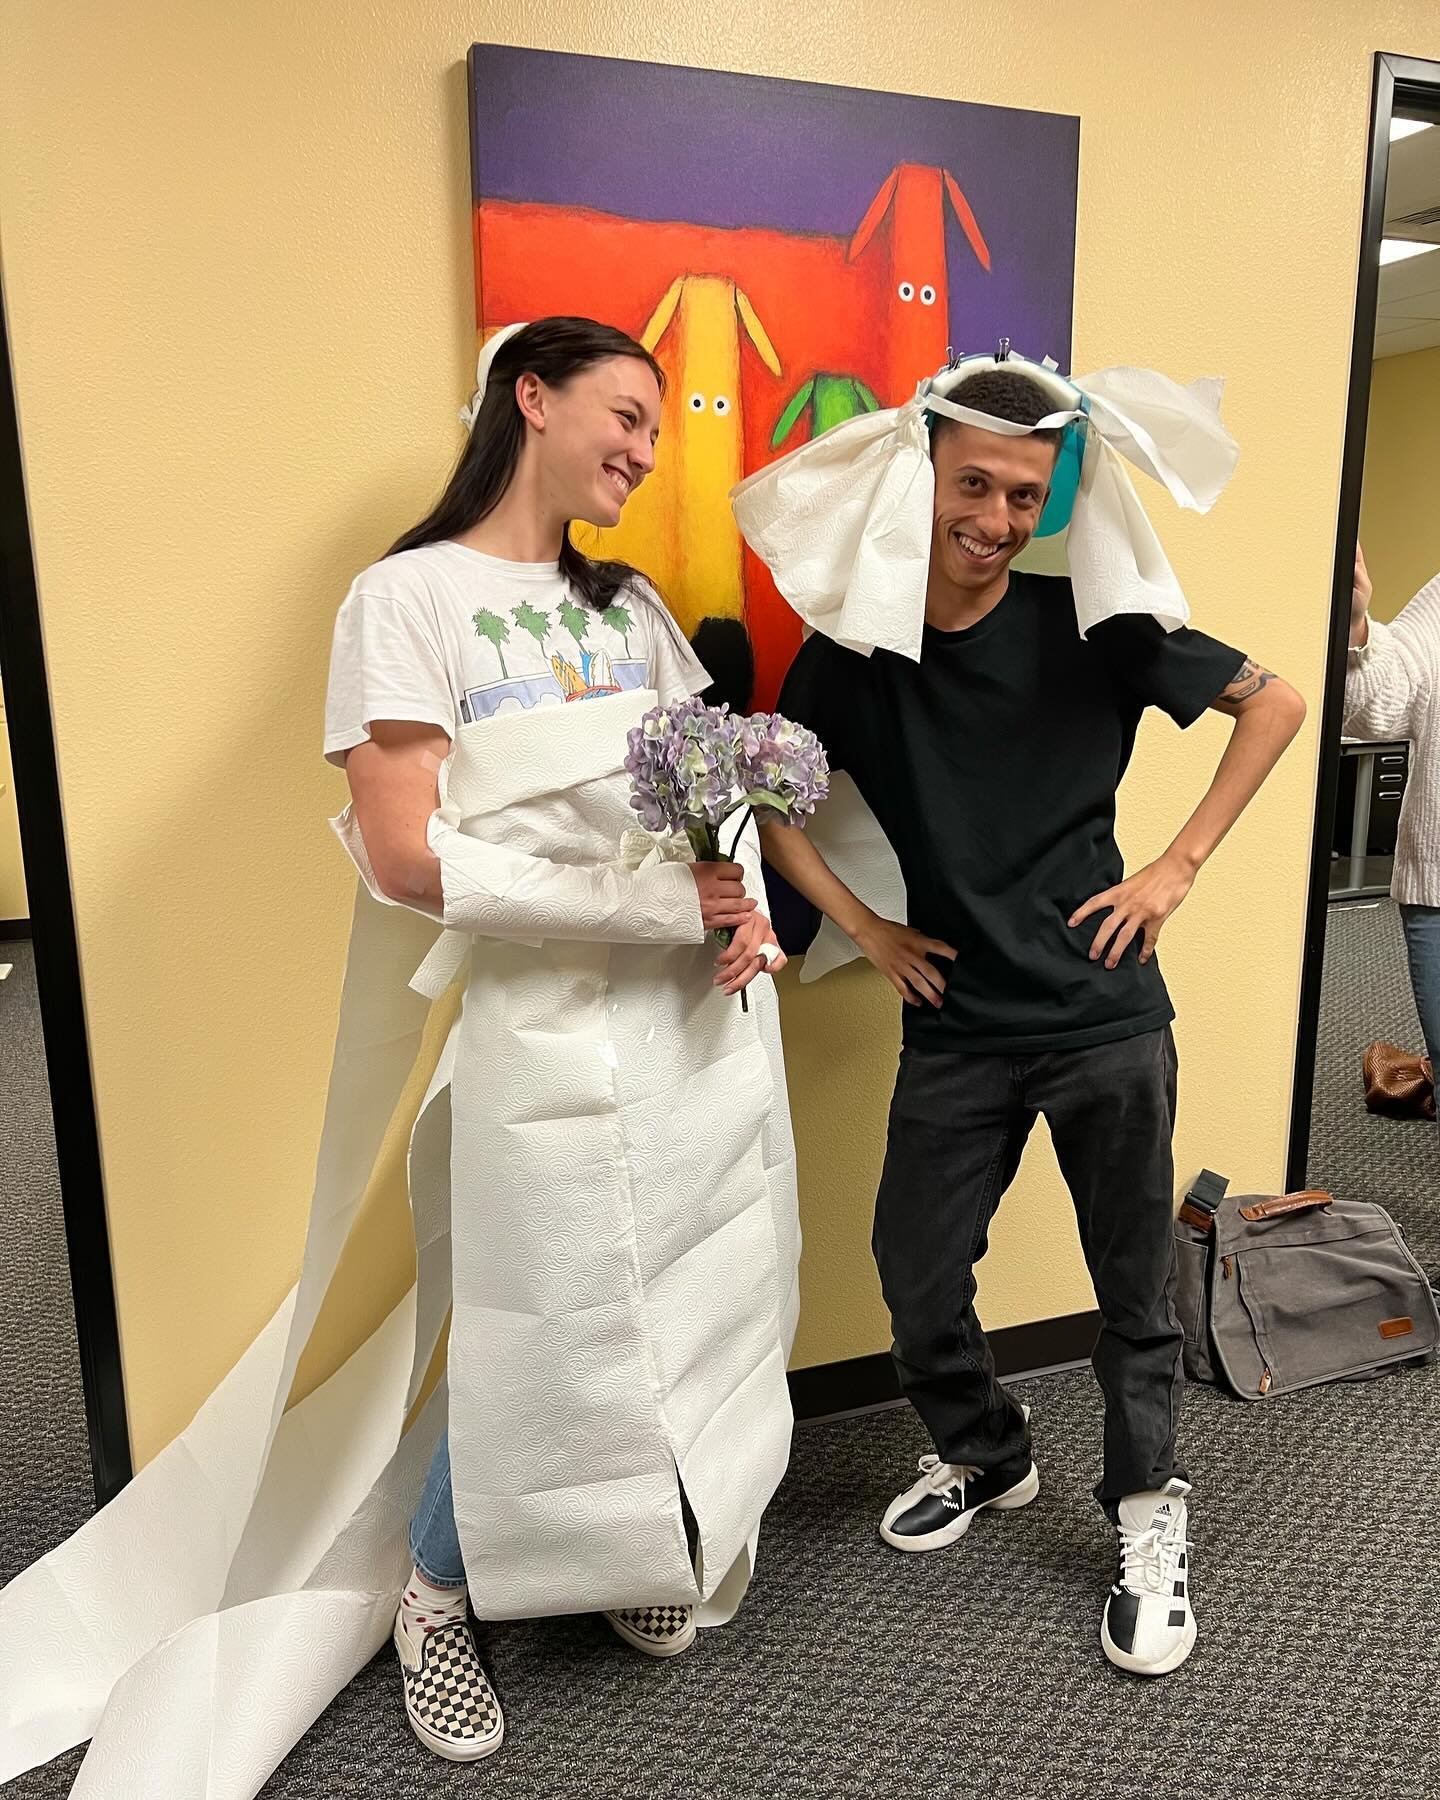 Team brainstorming practice! 
1) finding solutions to common therapy scenarios
2) preparing a wedding fashion show with office supplies. 

Also&hellip;CONGRATULATIONS to Roseville Senior Therapist Brooke, who JUST GOT MARRIED! 

#PALS #pacificautism 